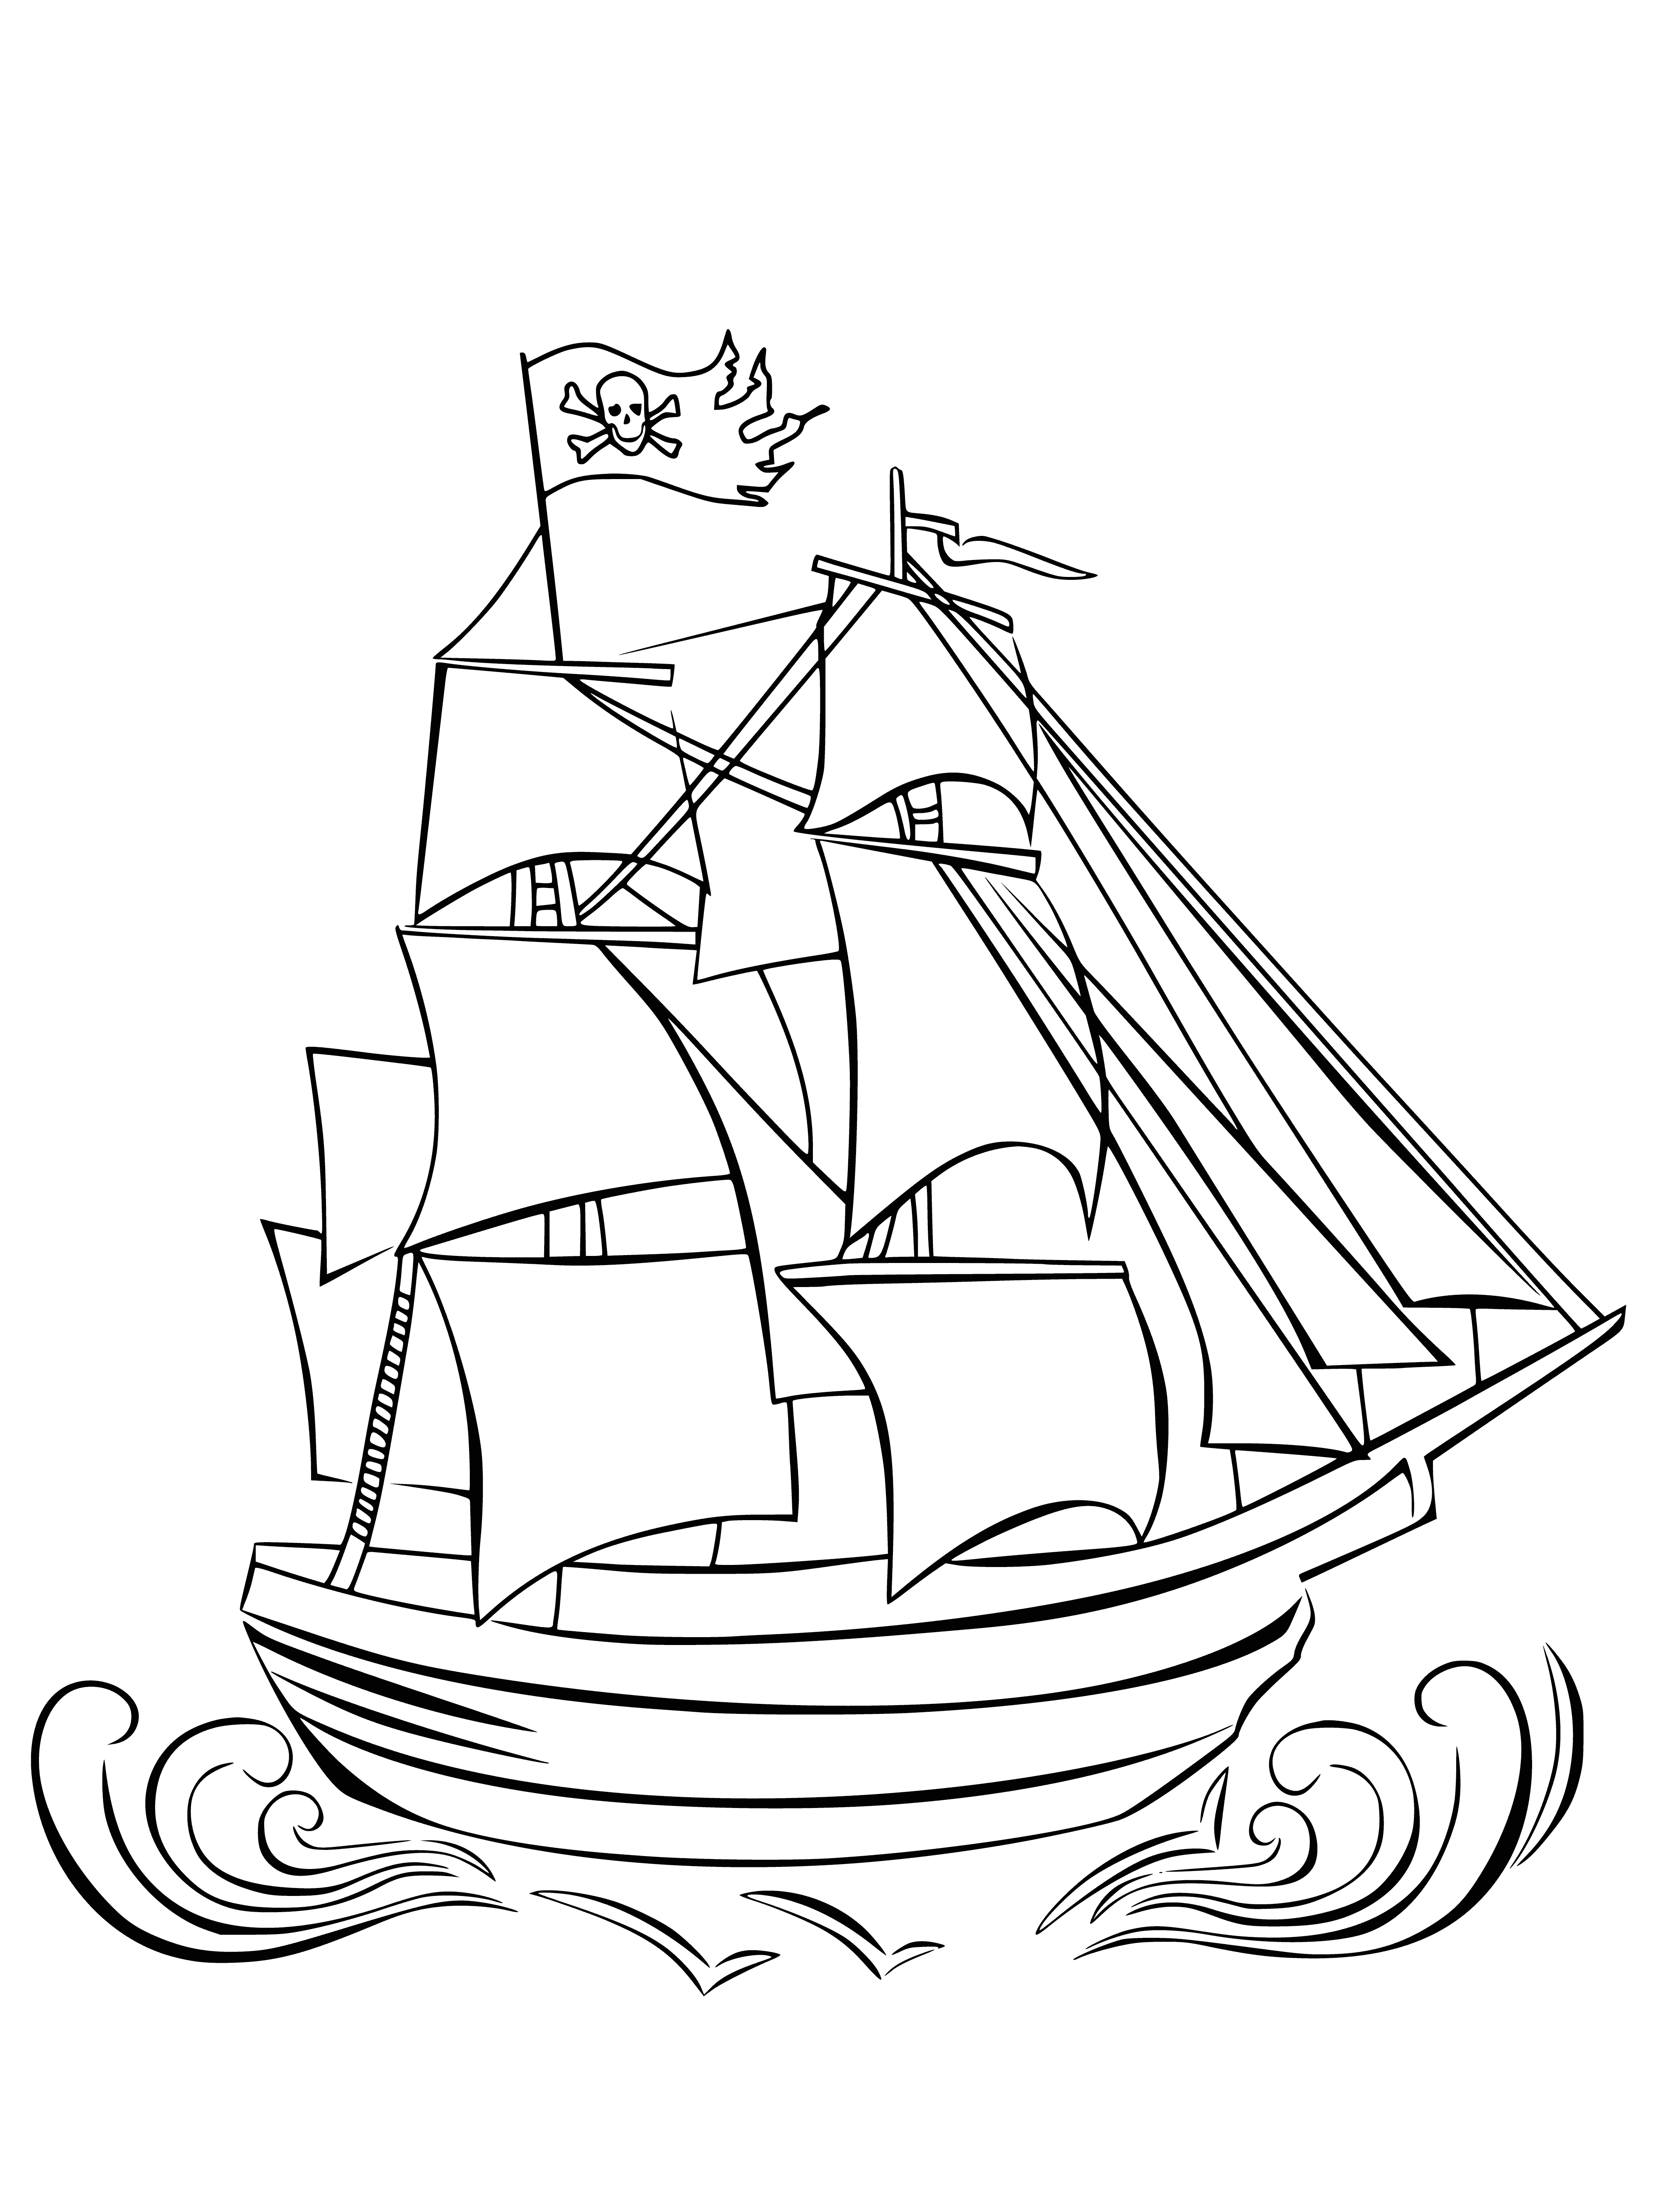 coloring page: Large ship sailing on water, sails billowing in the wind. Moving forward!